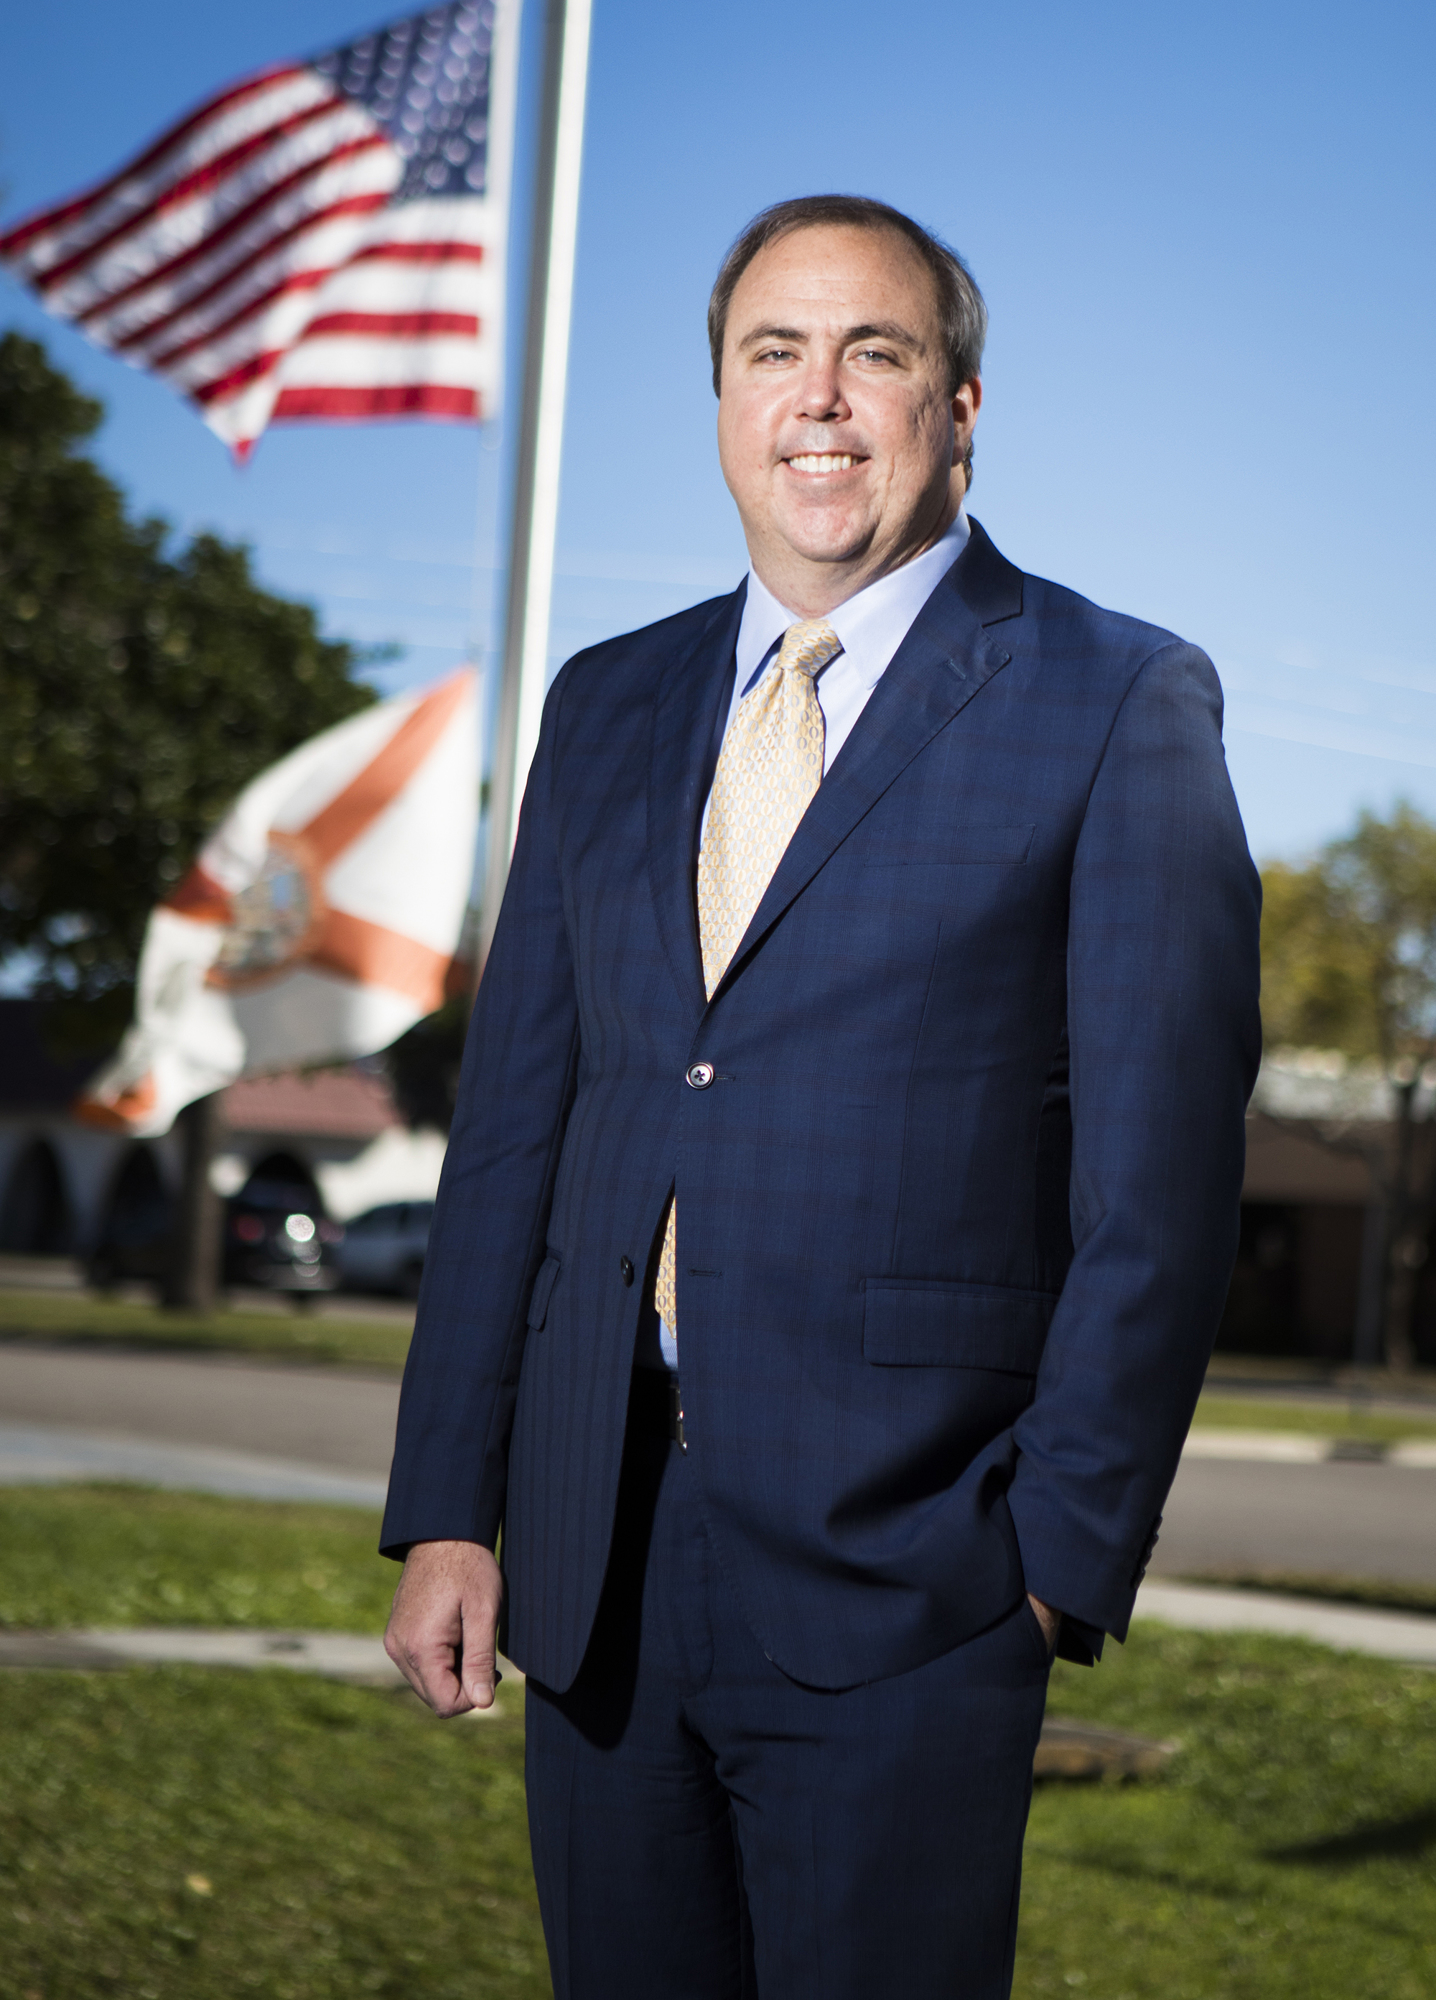 Mark Wemple. Joe Gruters has two new titles in Sarasota and Florida politics: chairman of the Republican Party of Florida and recently elected state senator.